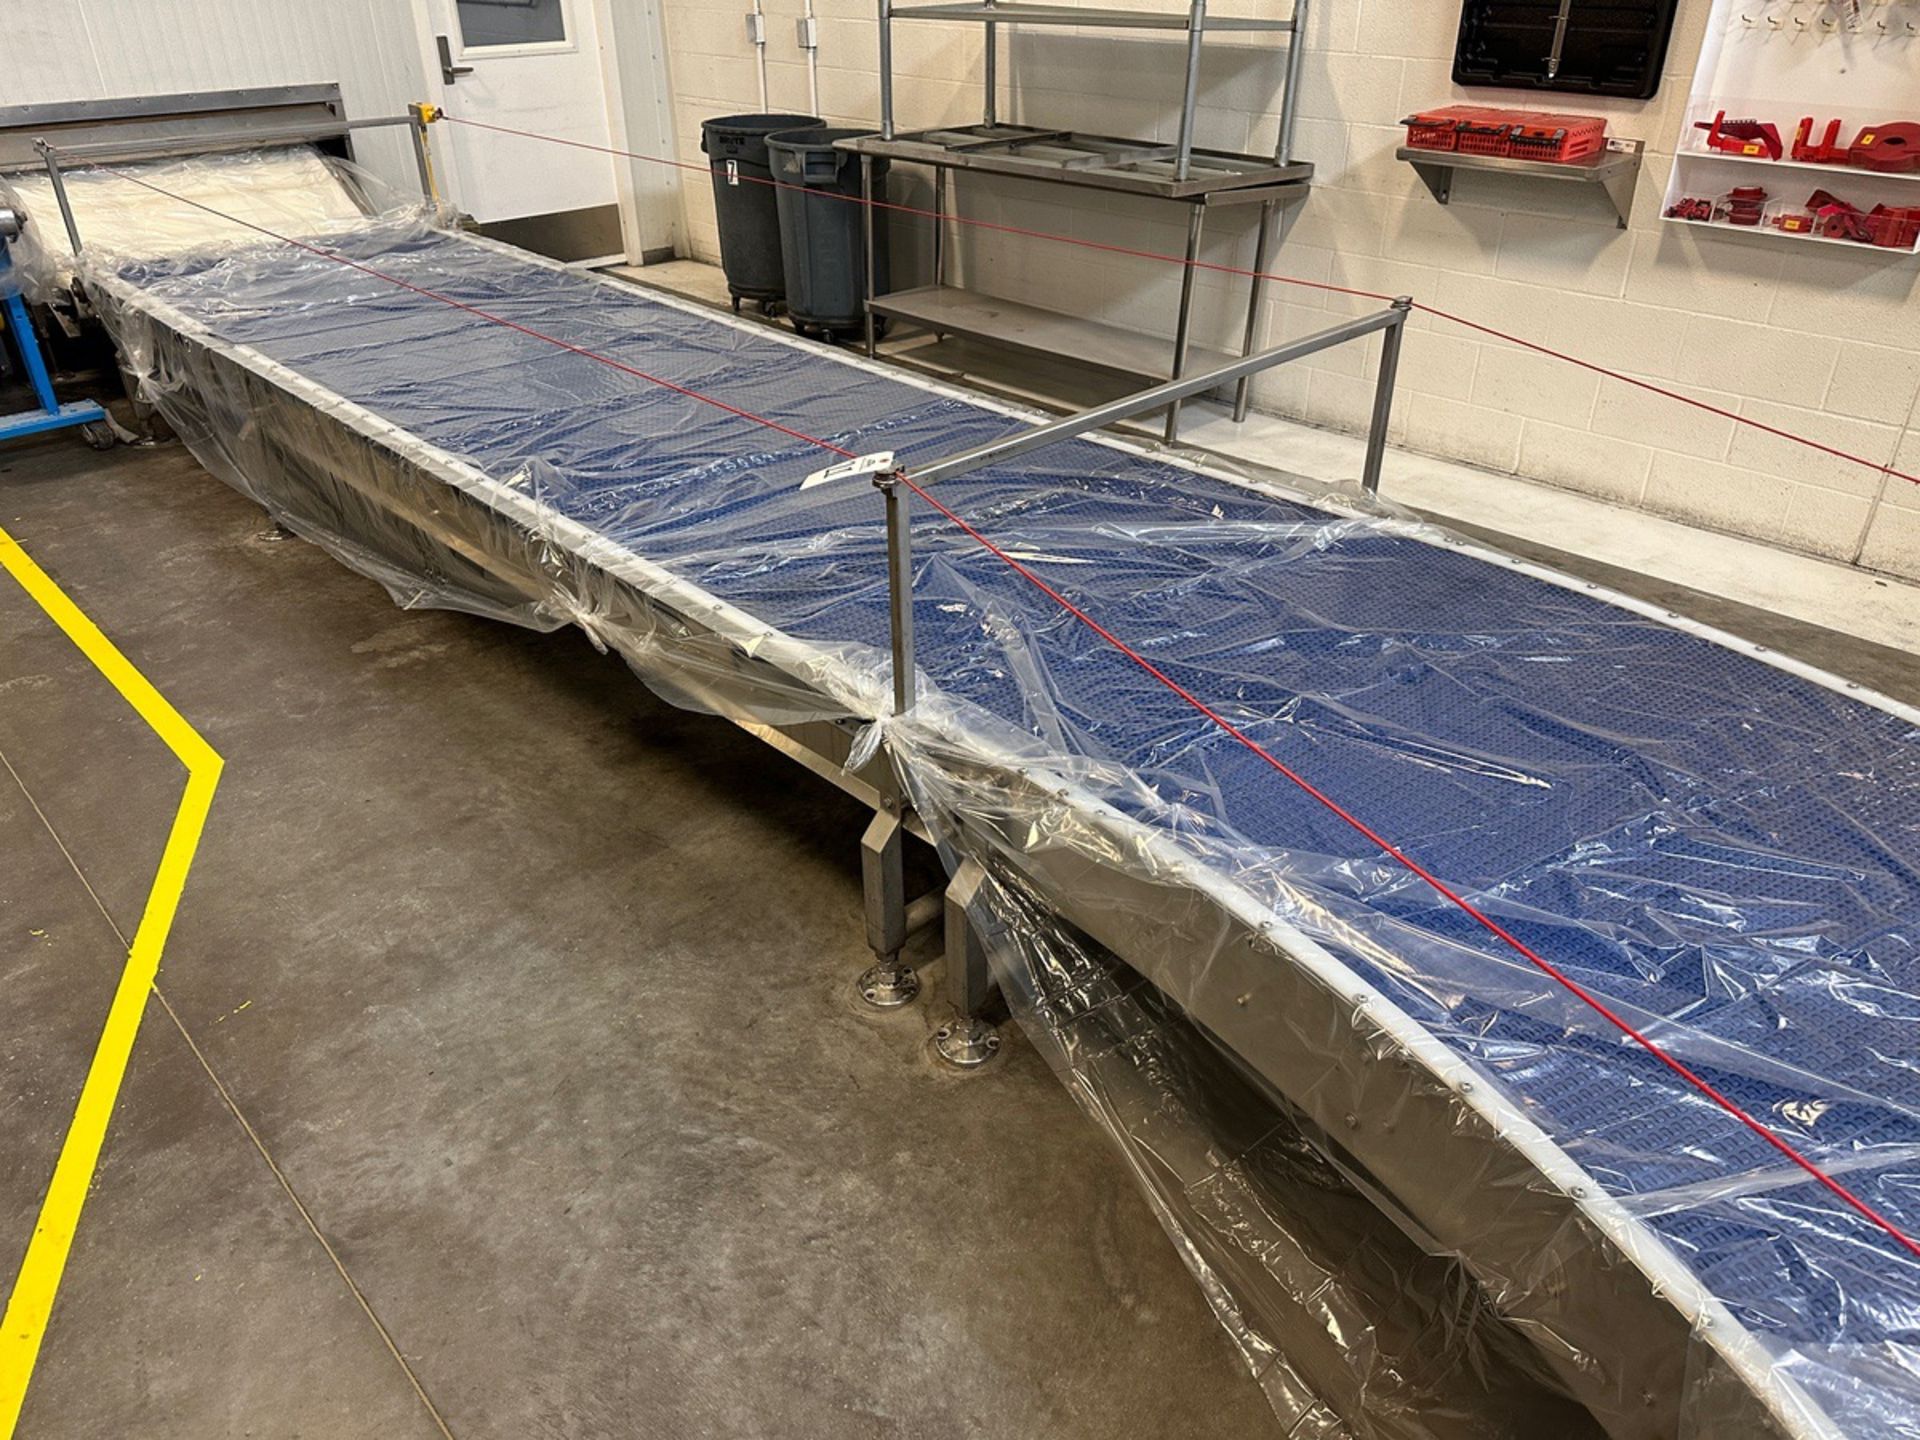 2019 AM Manufacturing Blue Belt Plastic Intralox Conveyor over Stainless Steel Fram | Rig Fee $1500 - Image 2 of 6